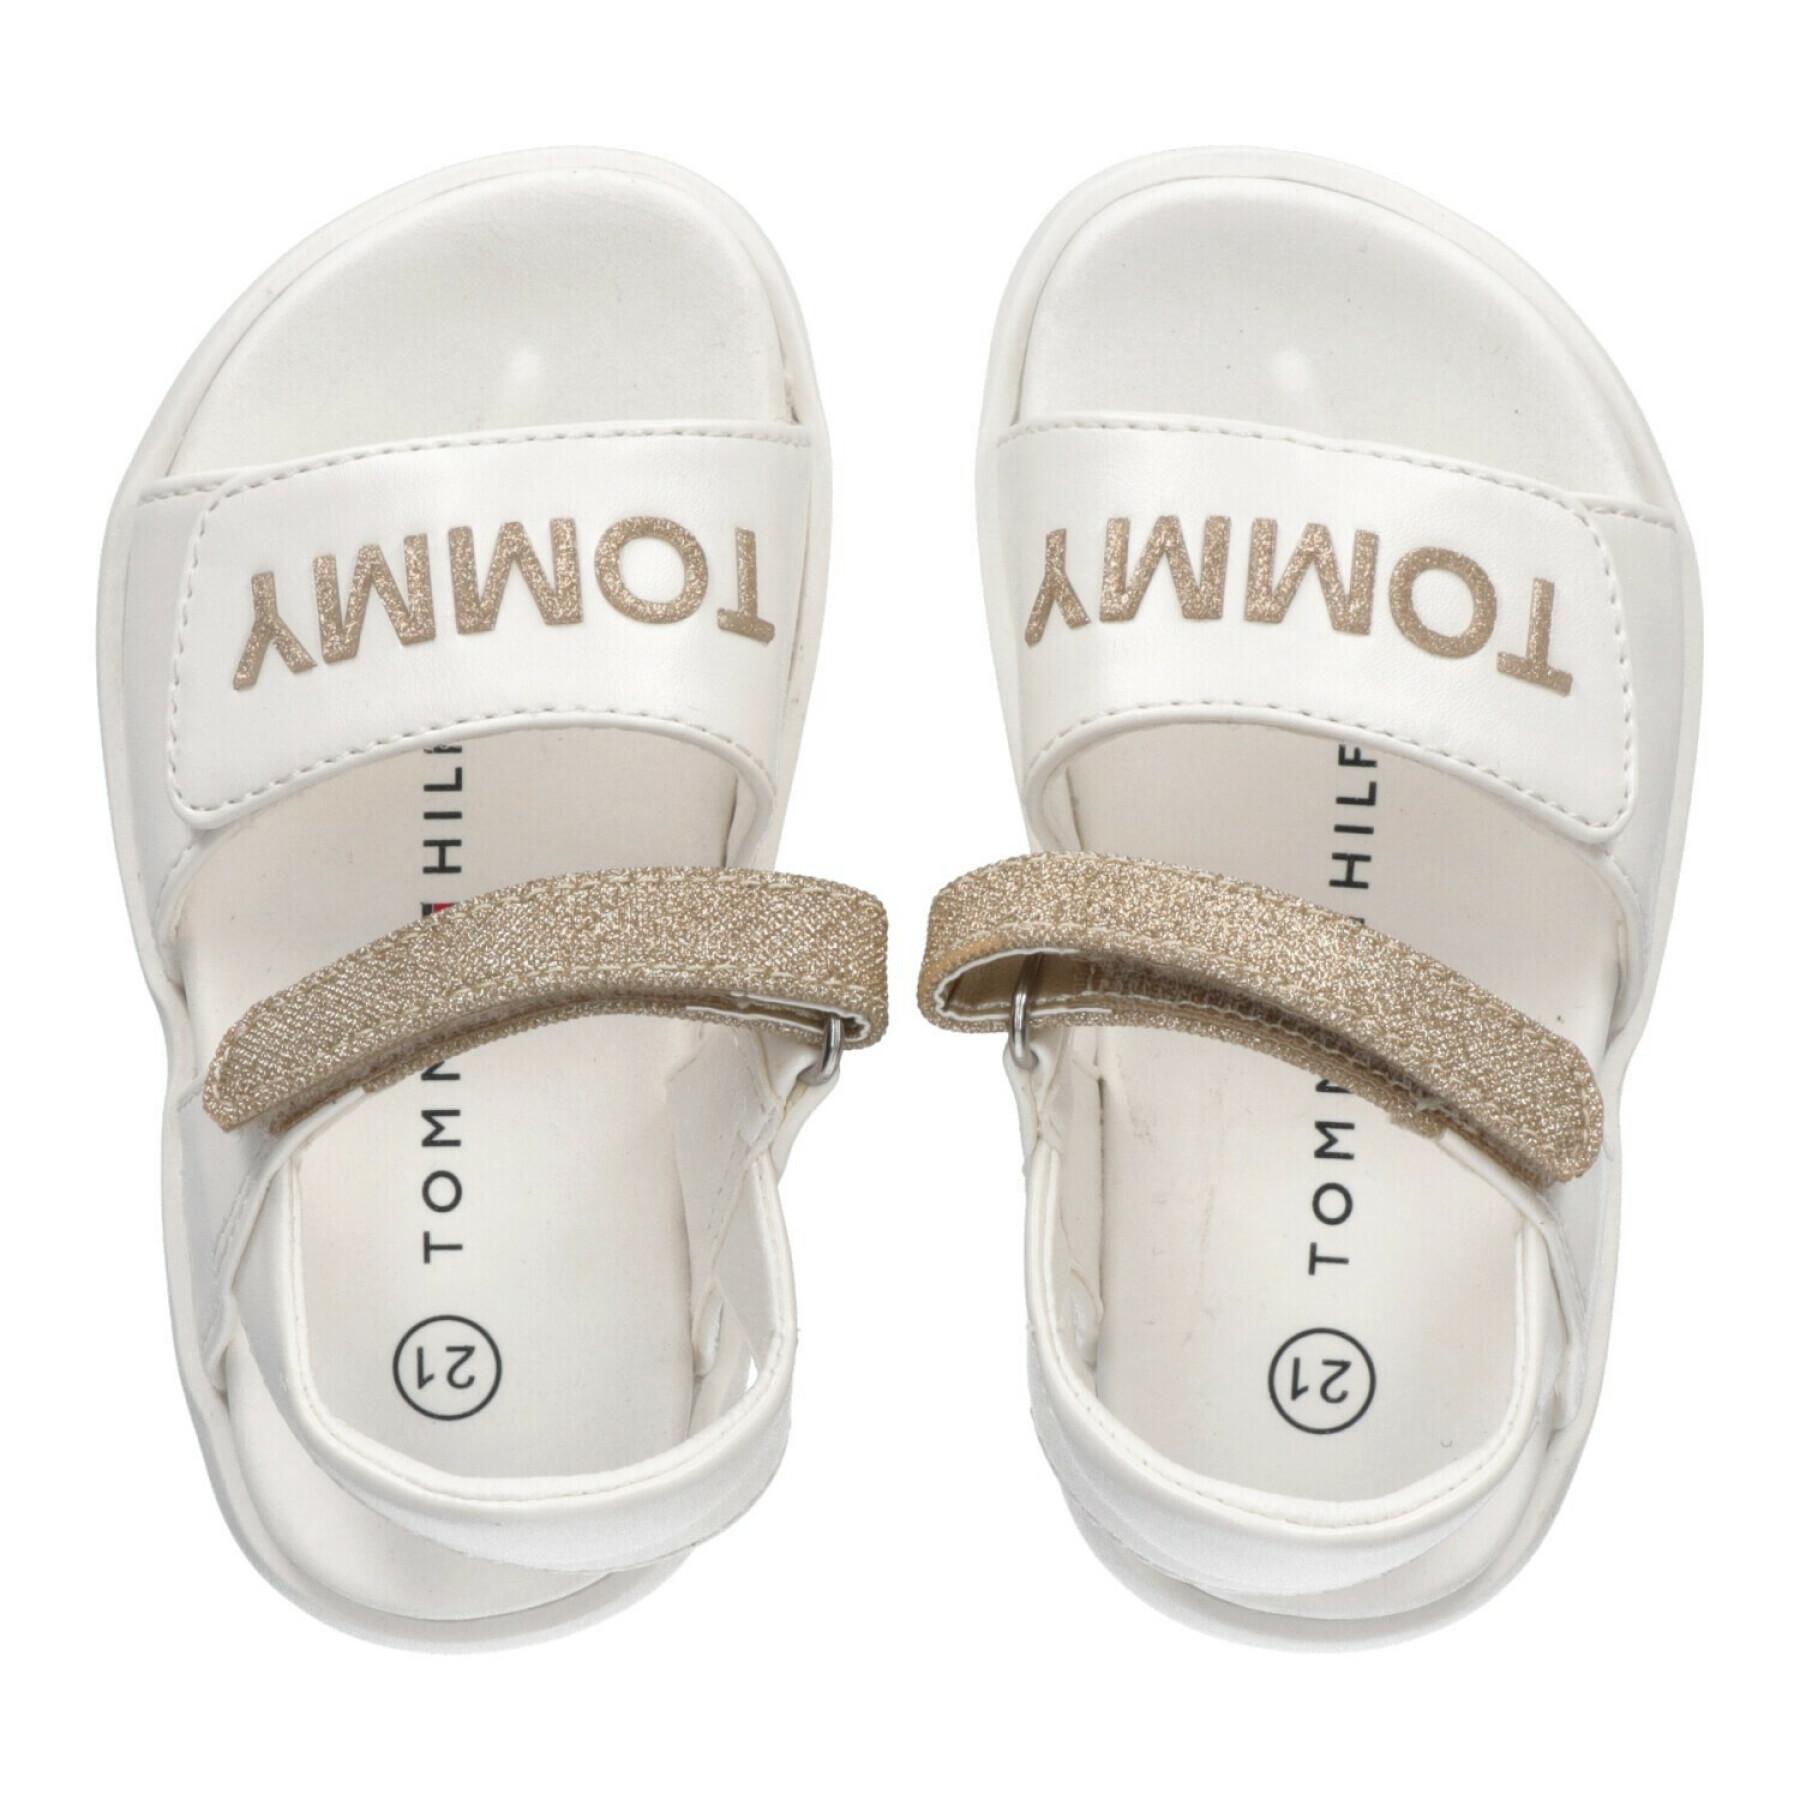 Velcro baby girl sandals Tommy Hilfiger